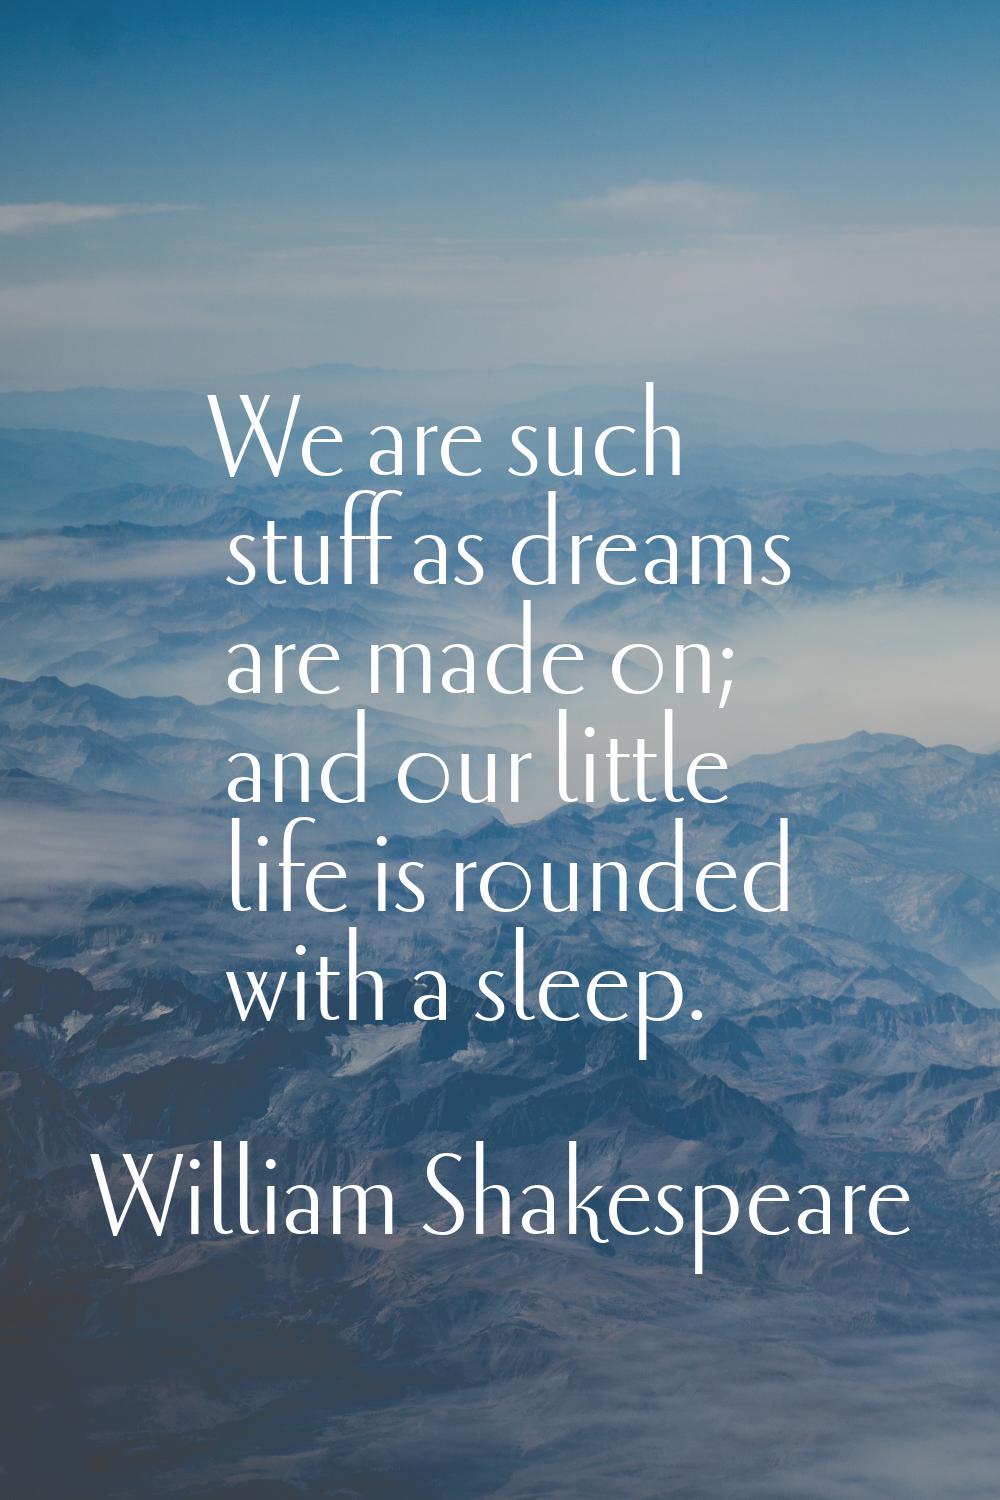 We are such stuff as dreams are made on; and our little life is rounded with a sleep.